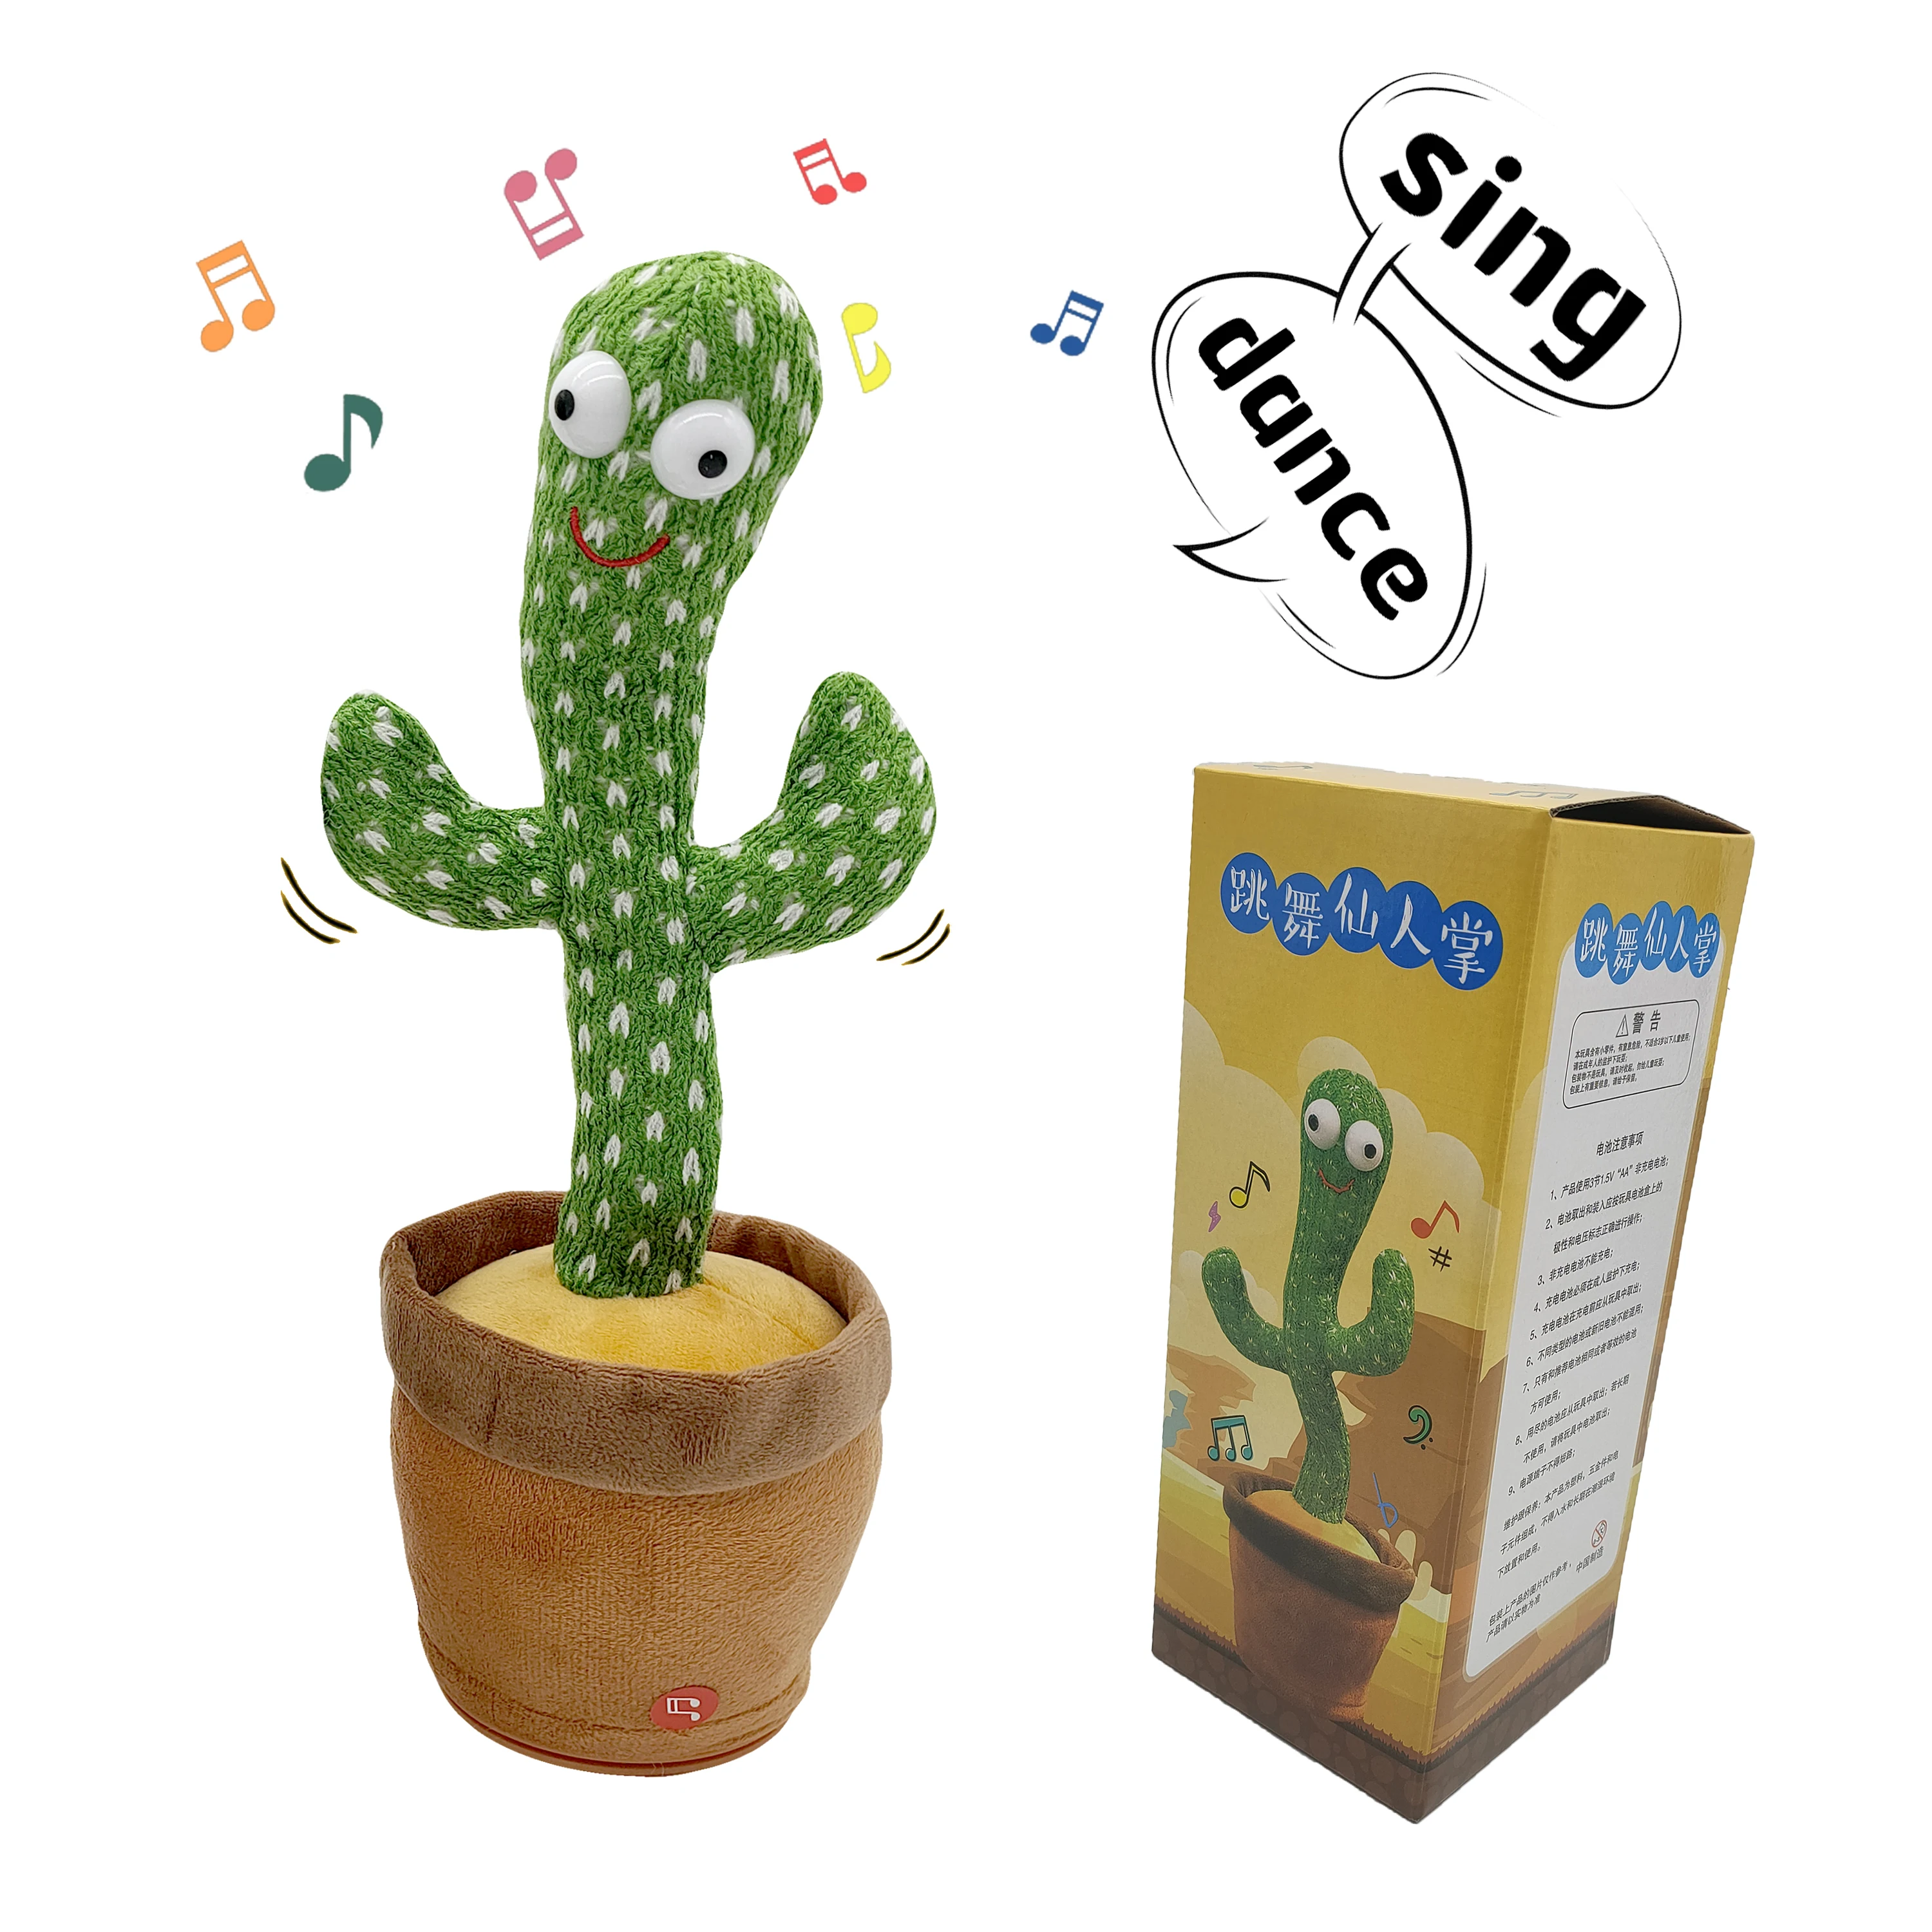 

2021 Hot Sale Funny Wriggle Doll Talking Singing Plush Toy Recording Musical Other Toy Dancing Cactus